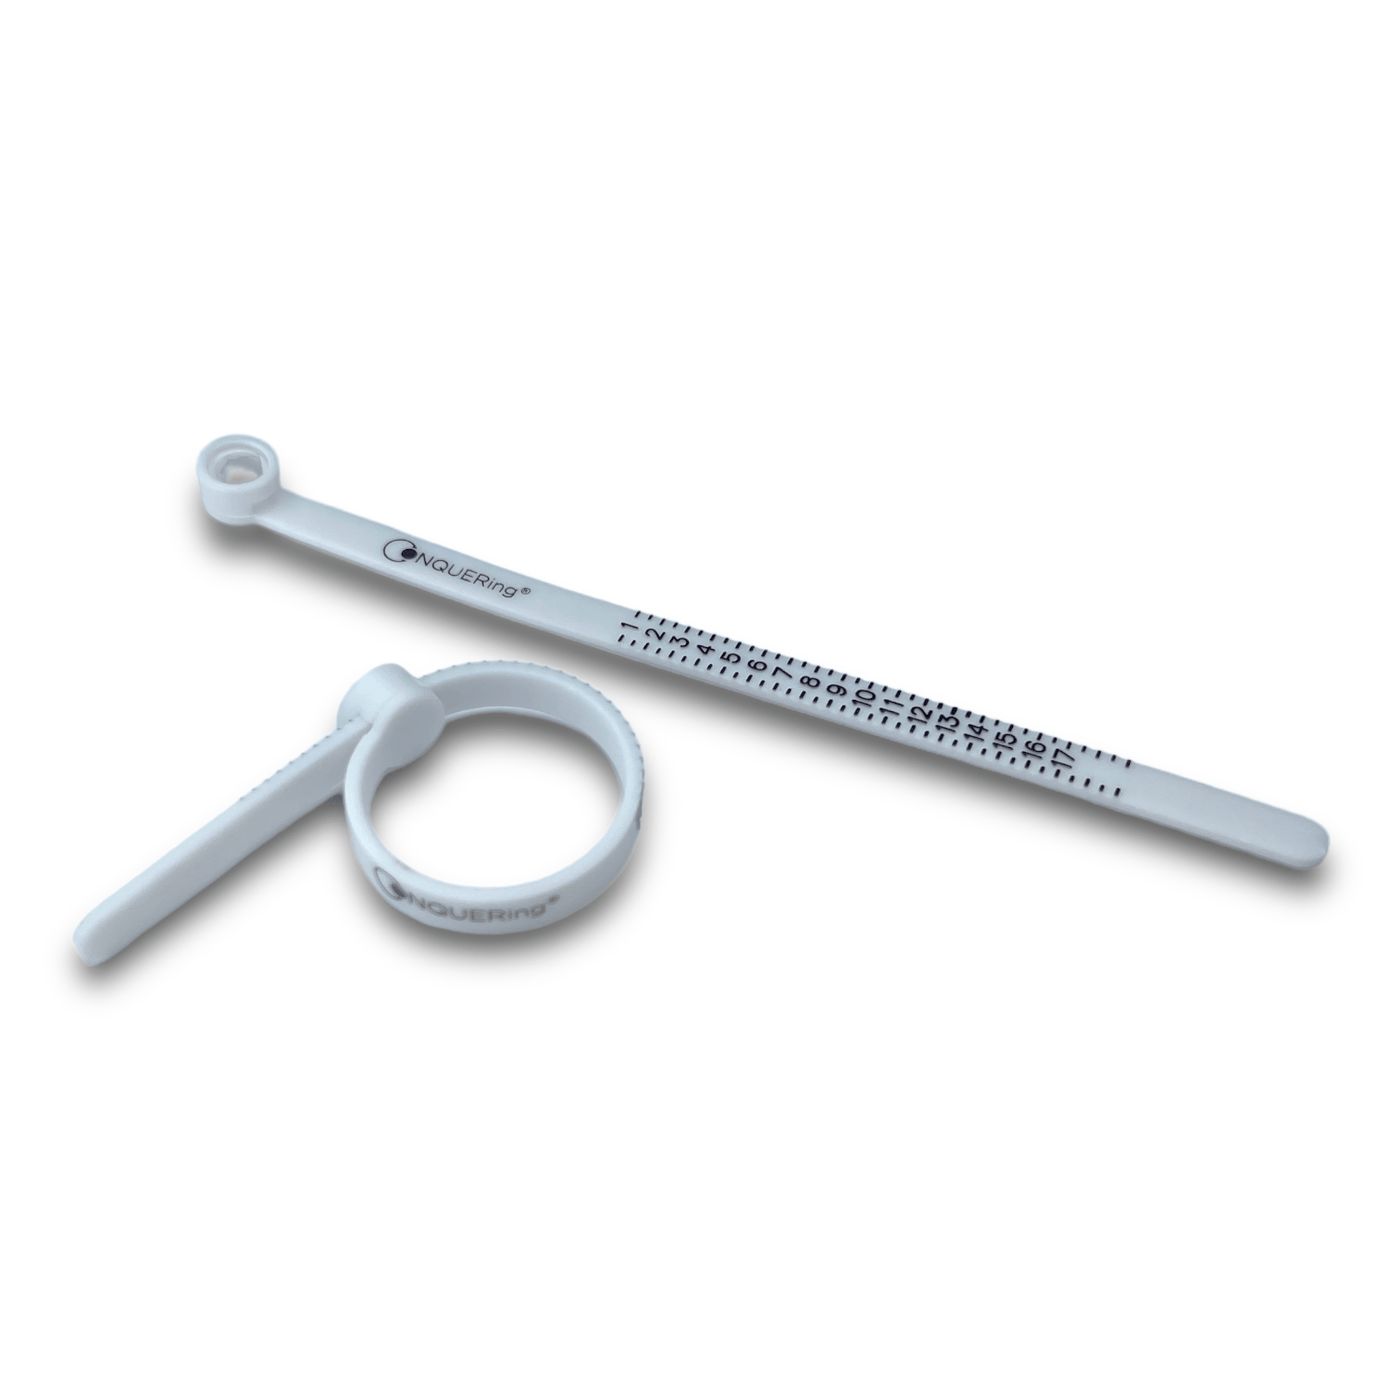 CONQUERing Ring Sizer Tool